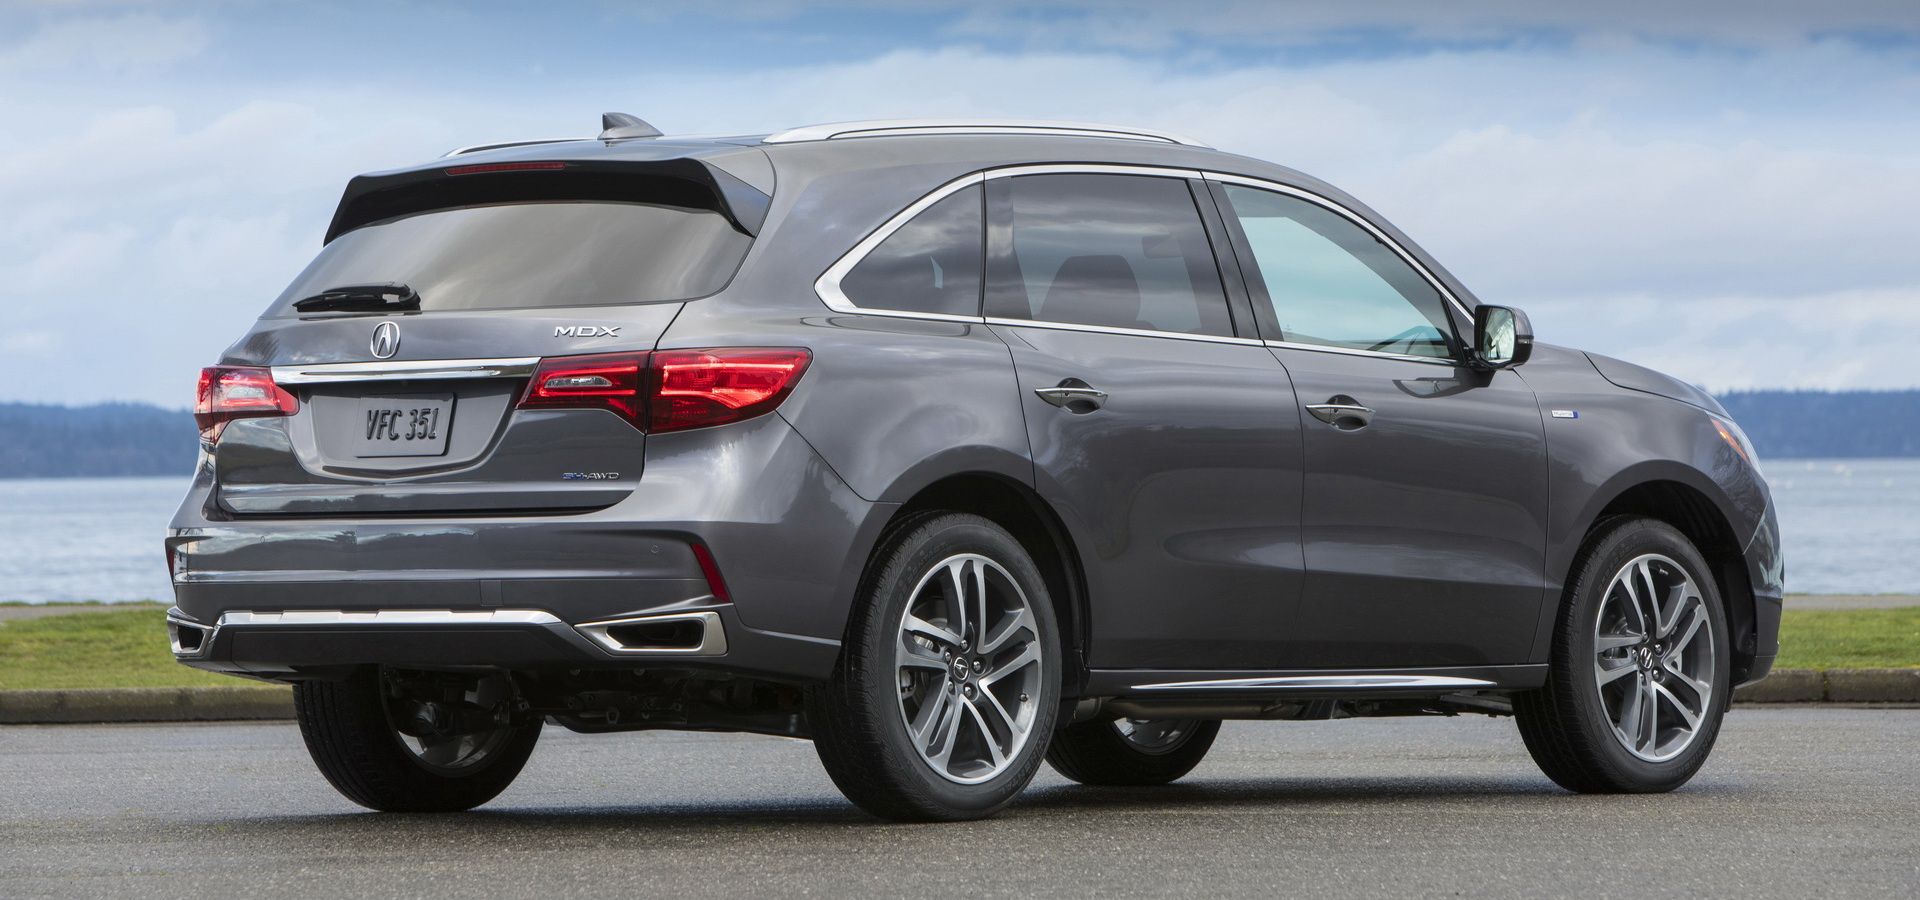 2020 acura mdx from the back